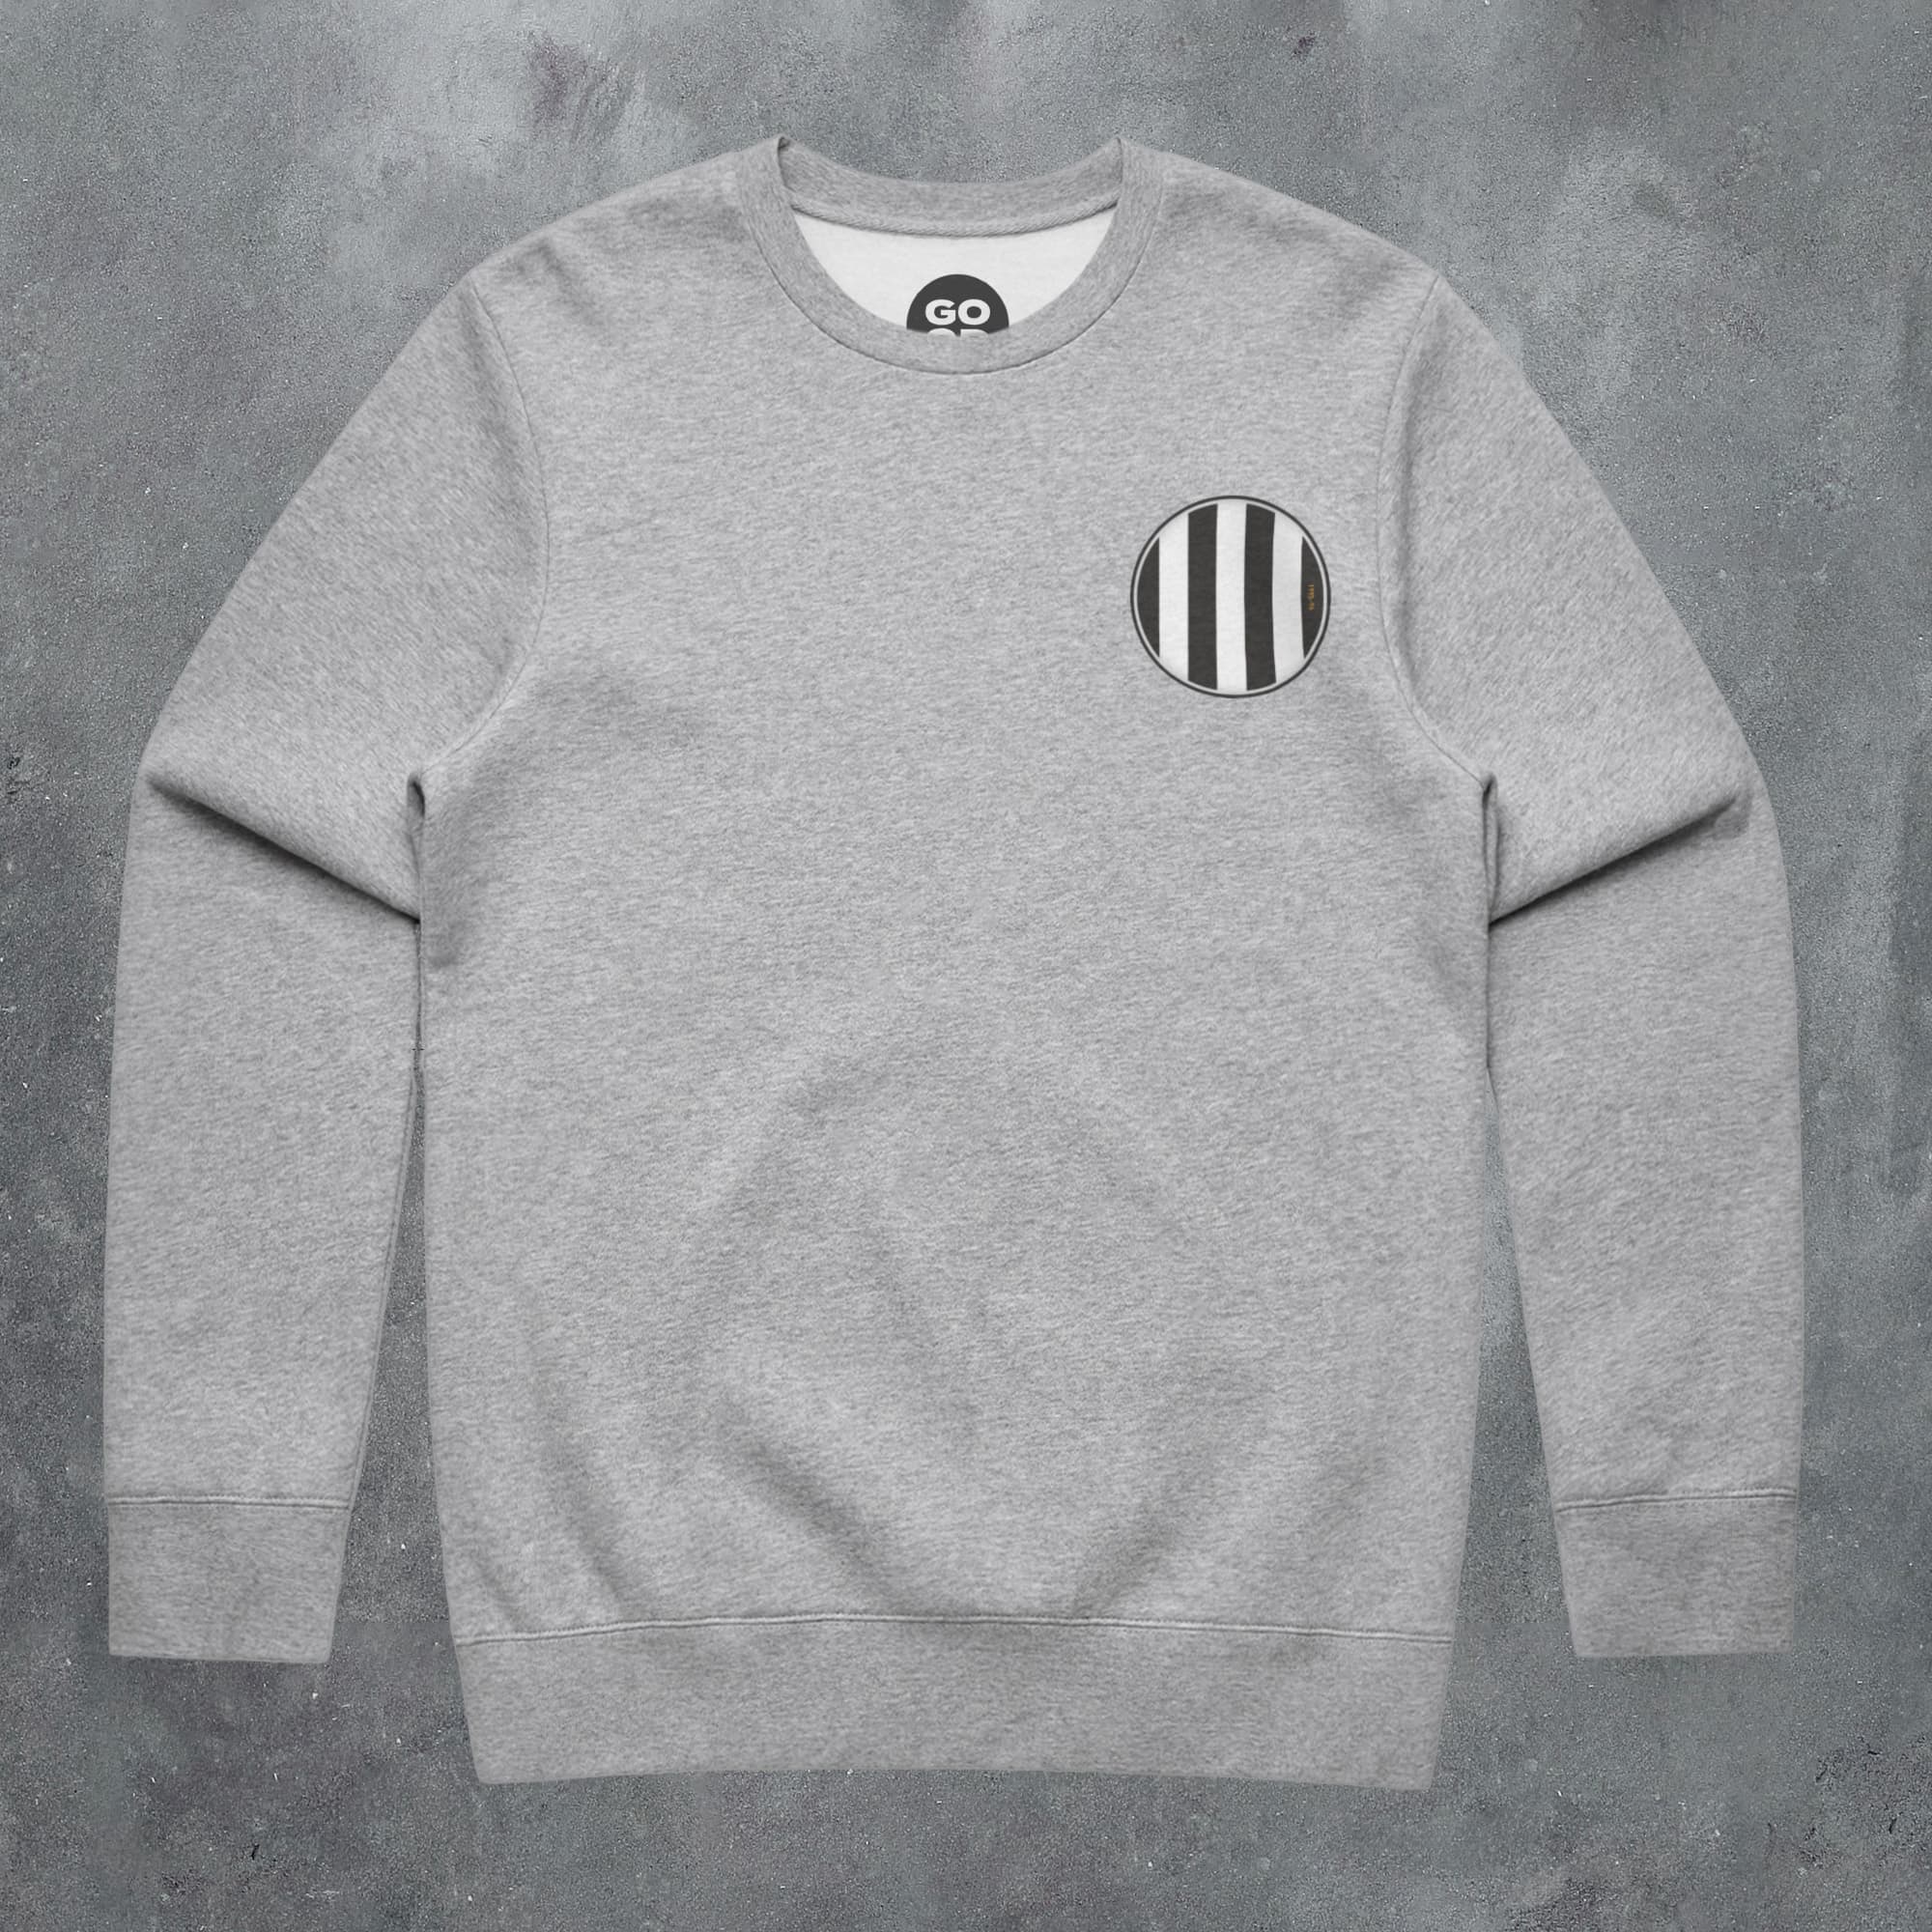 a grey sweatshirt with black and white stripes on it